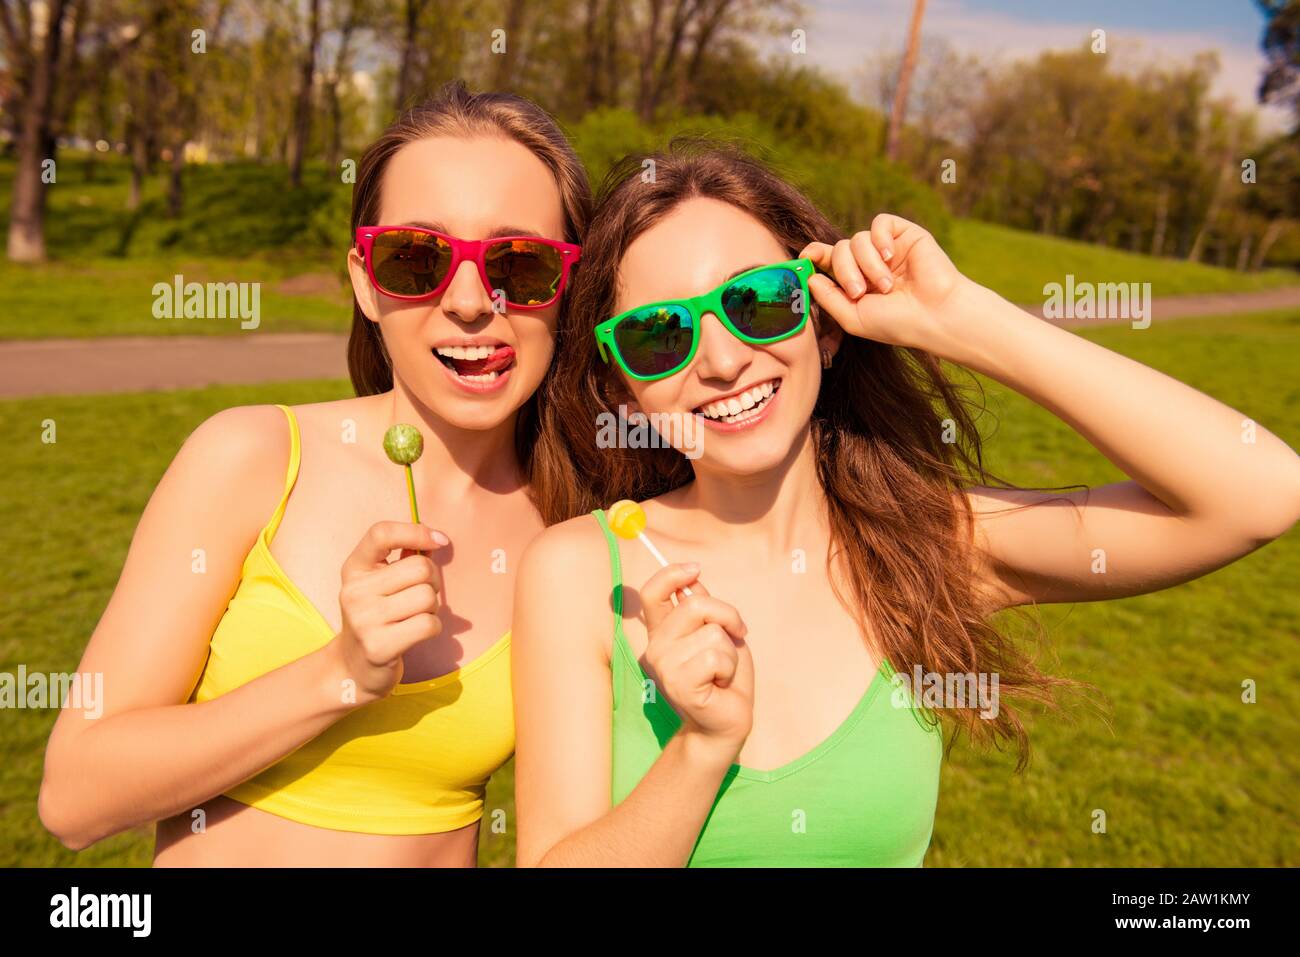 Attractive cheerful smiling girls having walk in park with lollipops Stock Photo